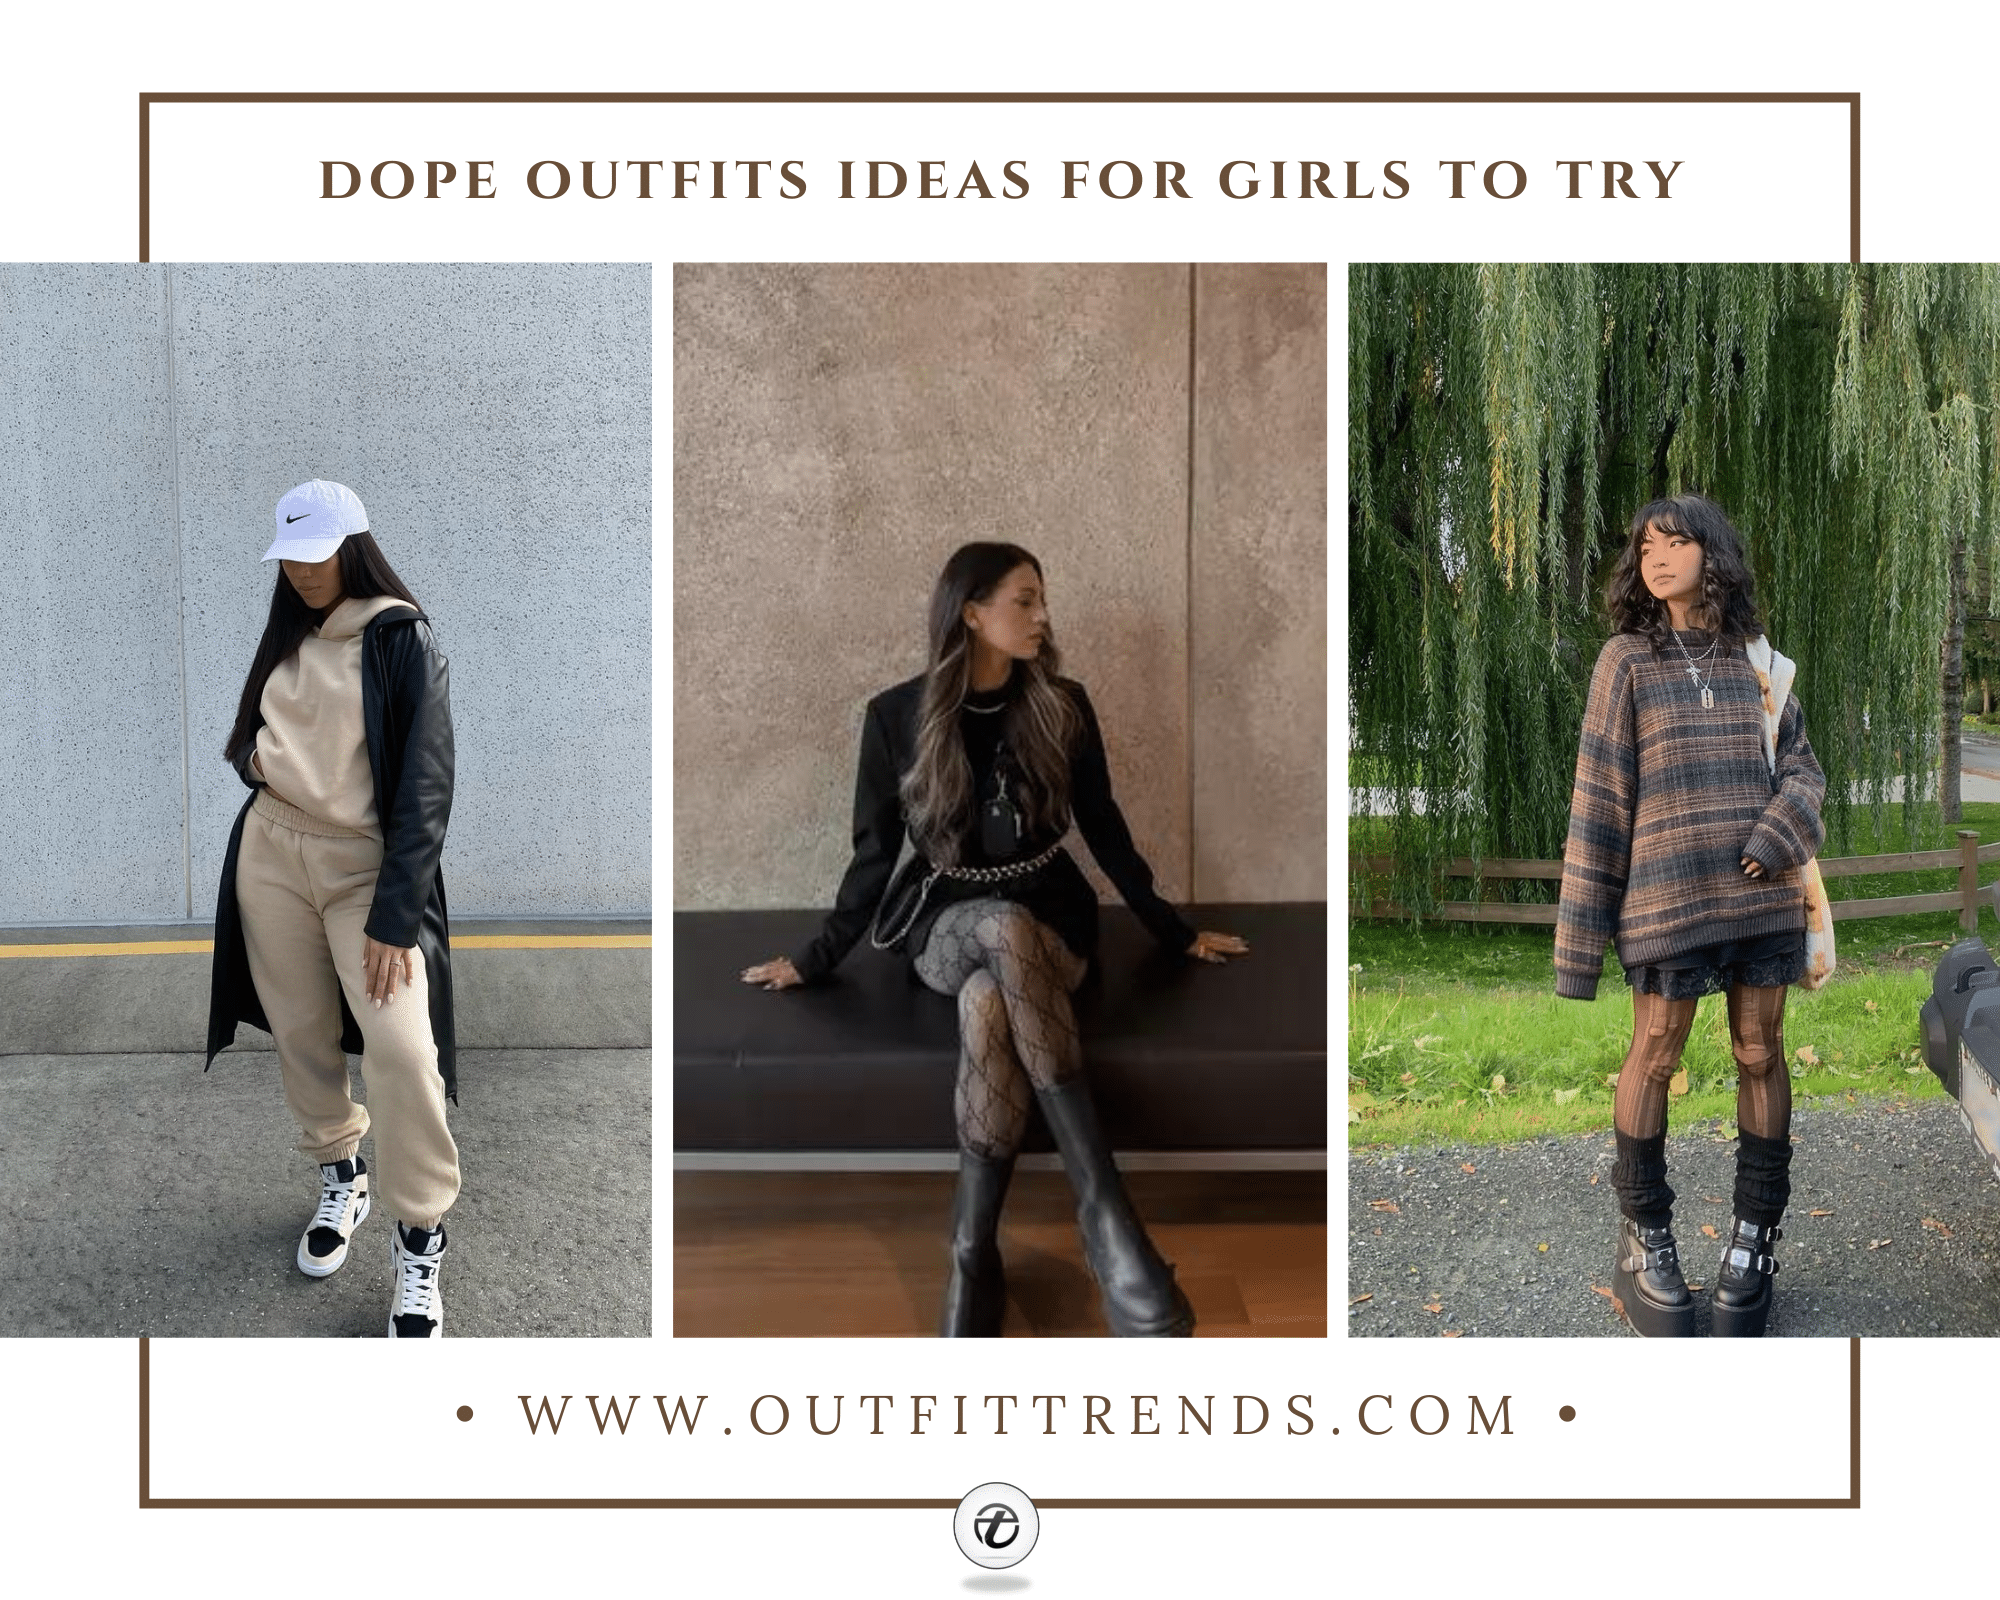 Dope Outfits for Girls - 28 Dope Fashion Ideas You Can Try